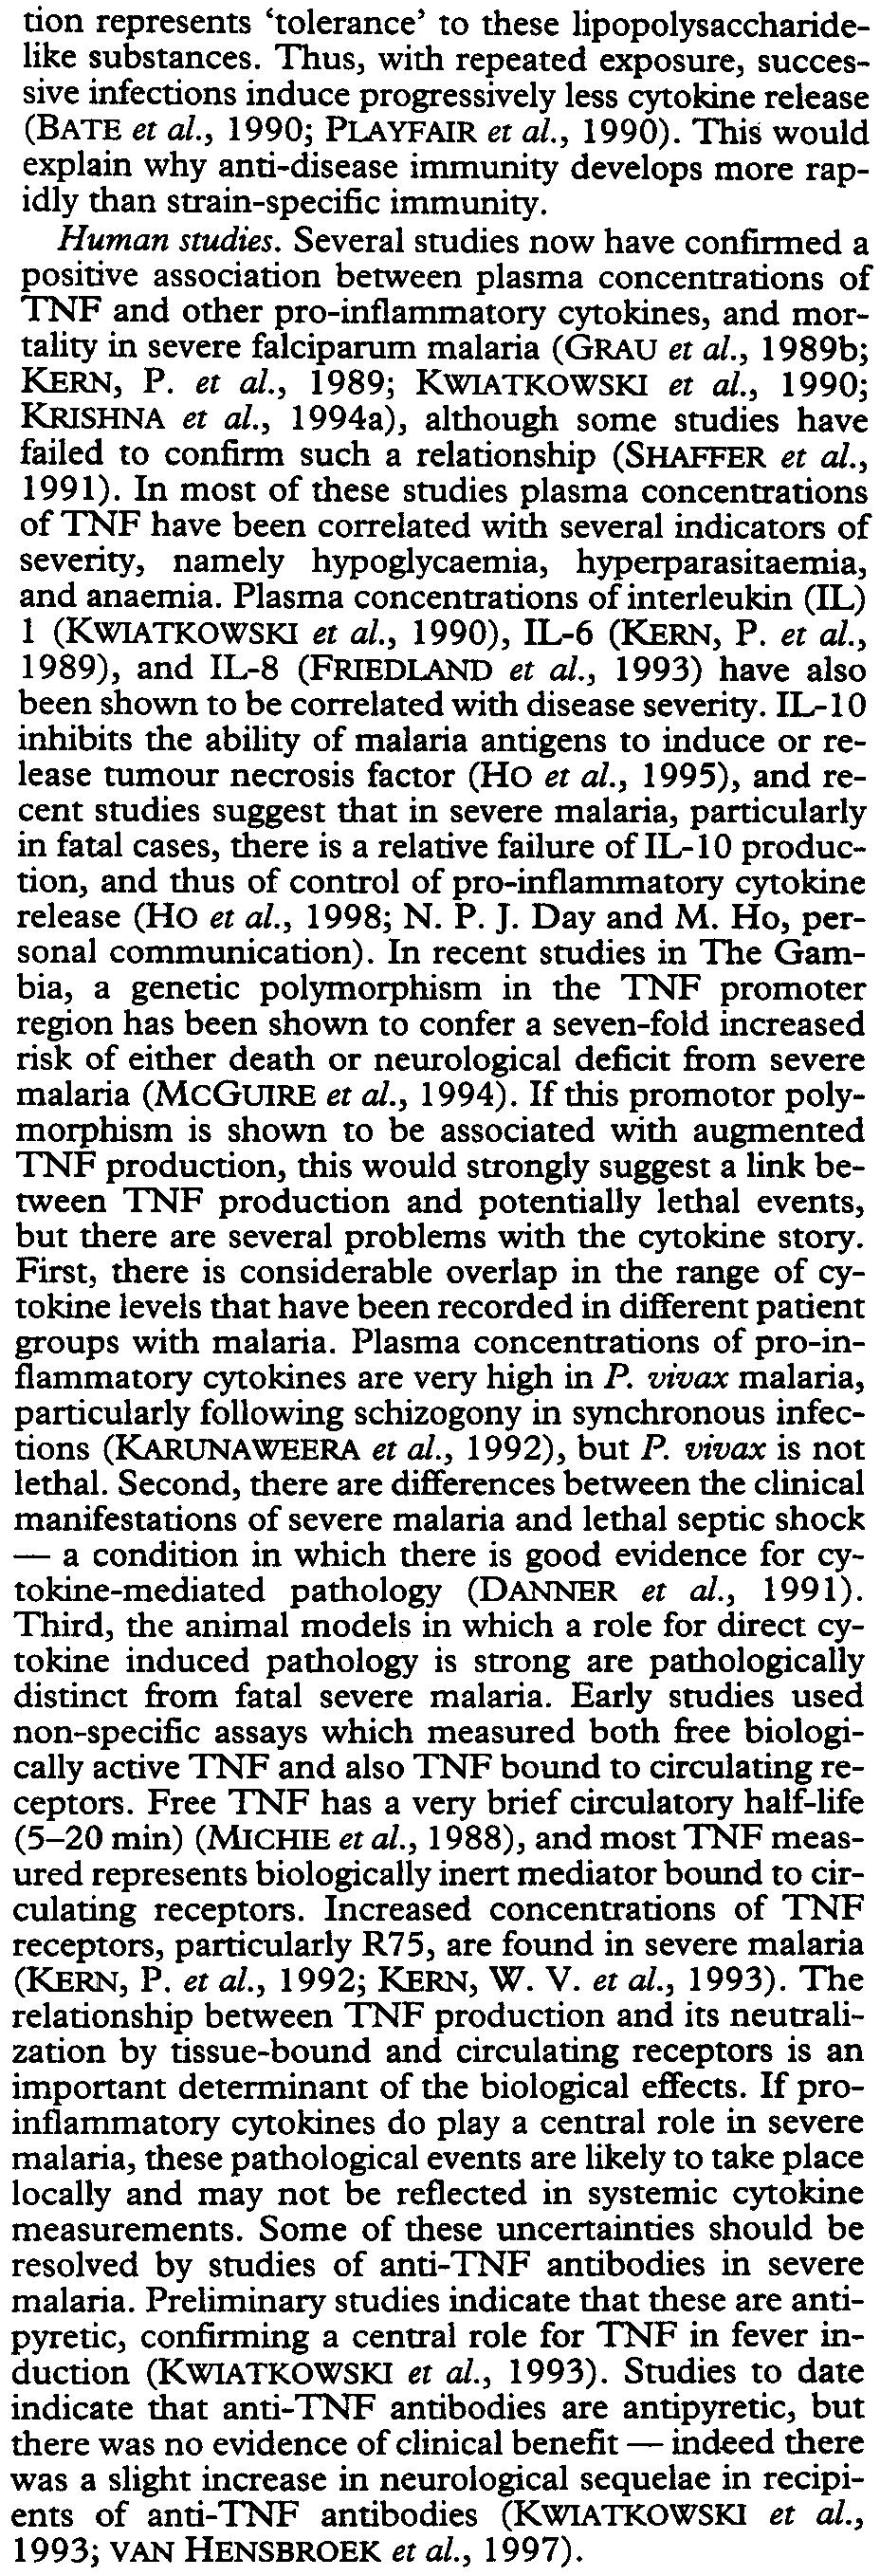 polyclonal antibodies (GR\'\U et at., 1987b, 1987c). This treatment does not infll.jence parasitaemia and, although it protects from cerebral damage, the mice ultimately die of anaemia.